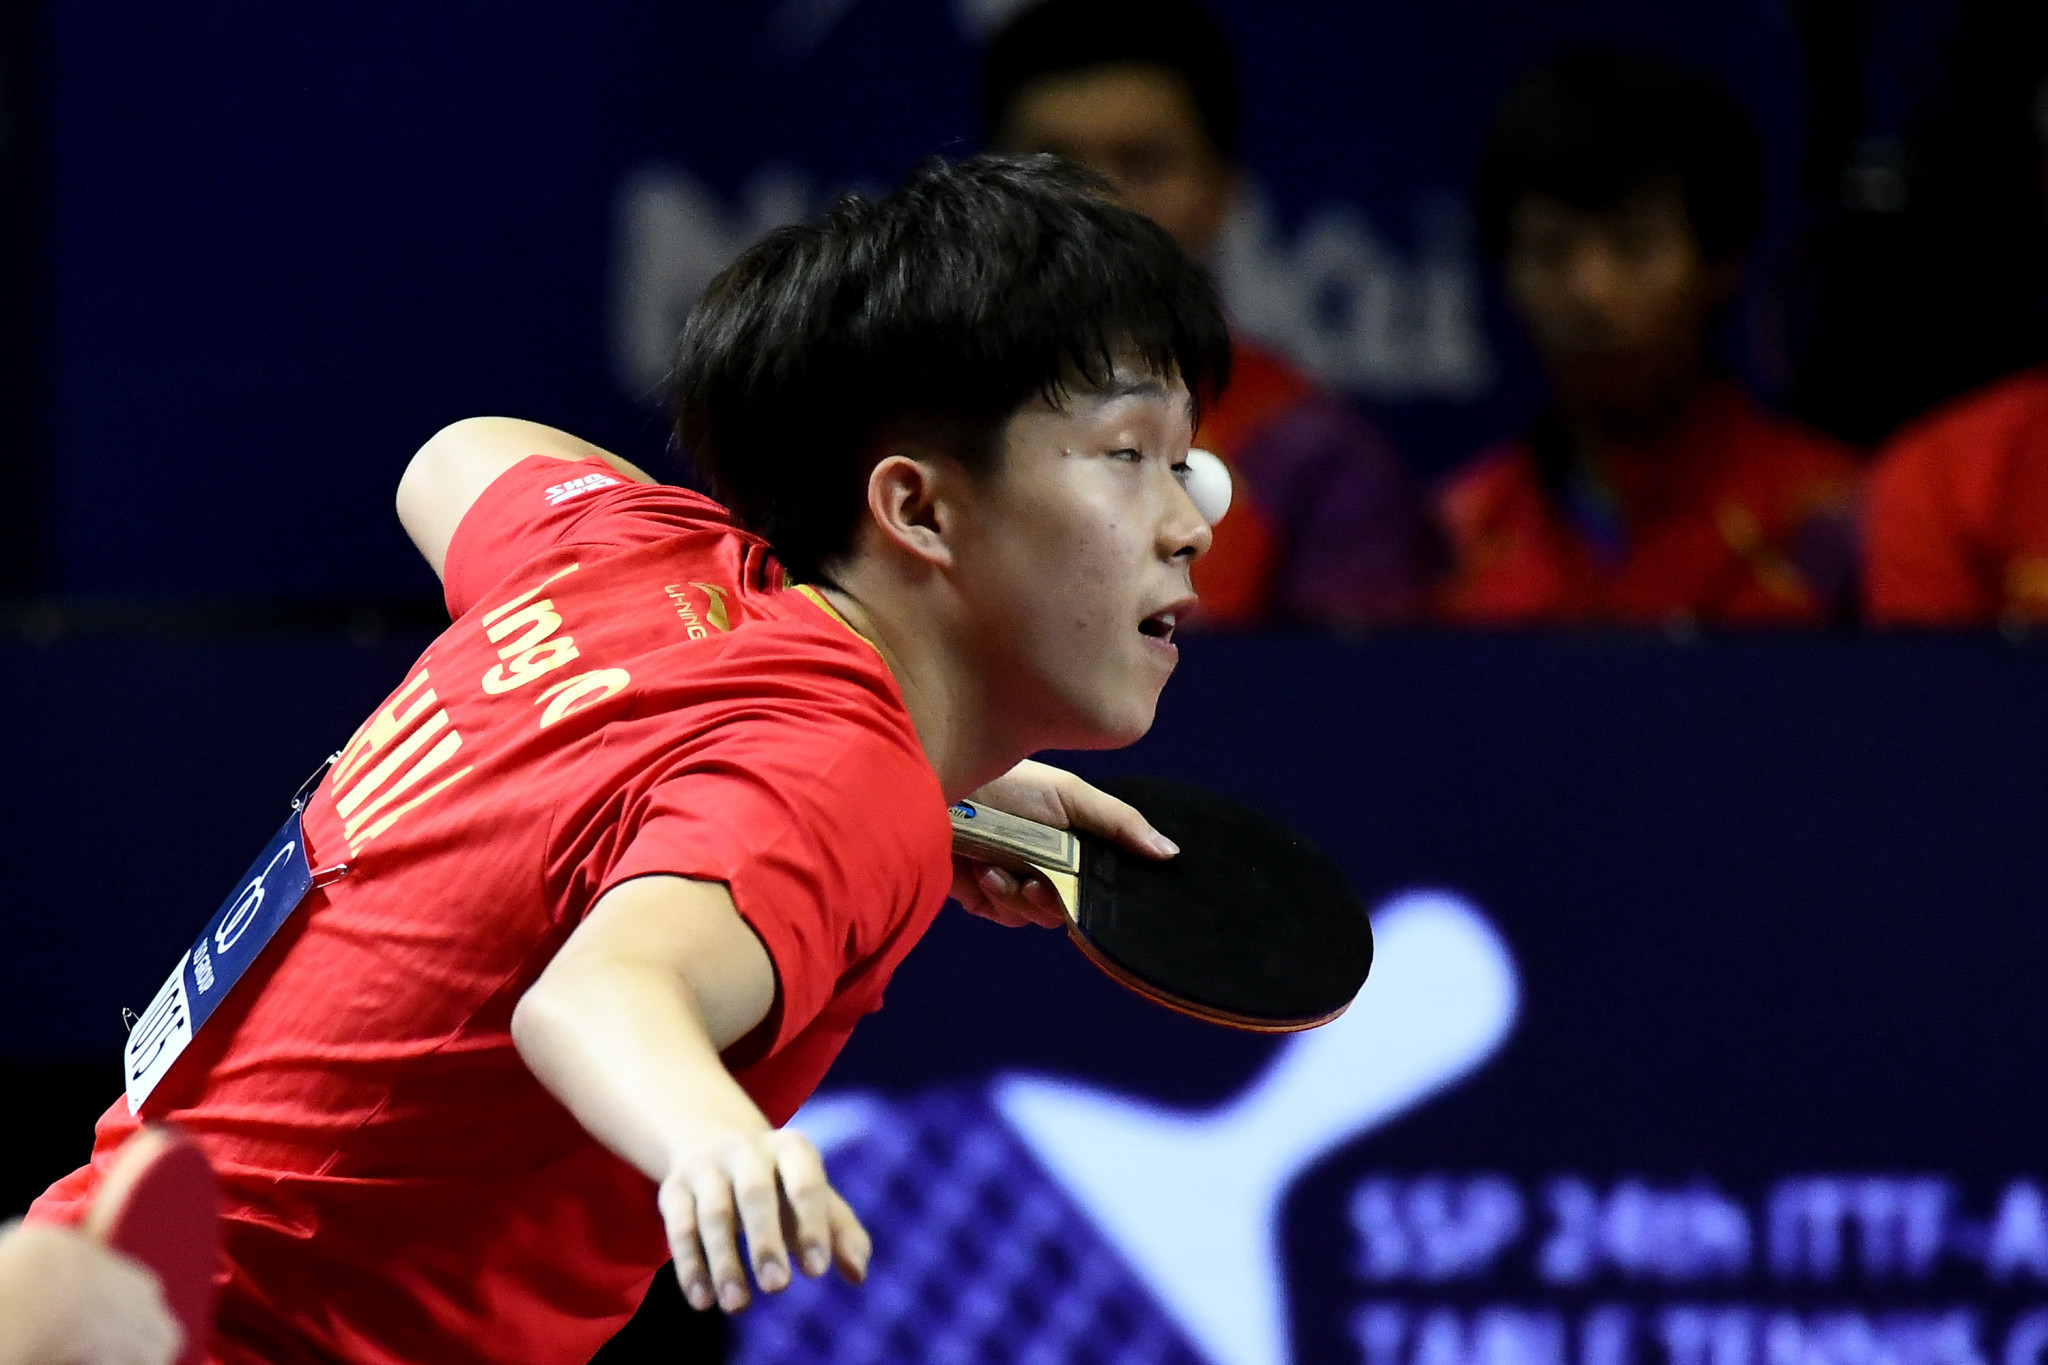 Some of the best players in the world, including those from China, are expected to contest the 2021 Asian Table Tennis Championships in Doha ©Getty Images